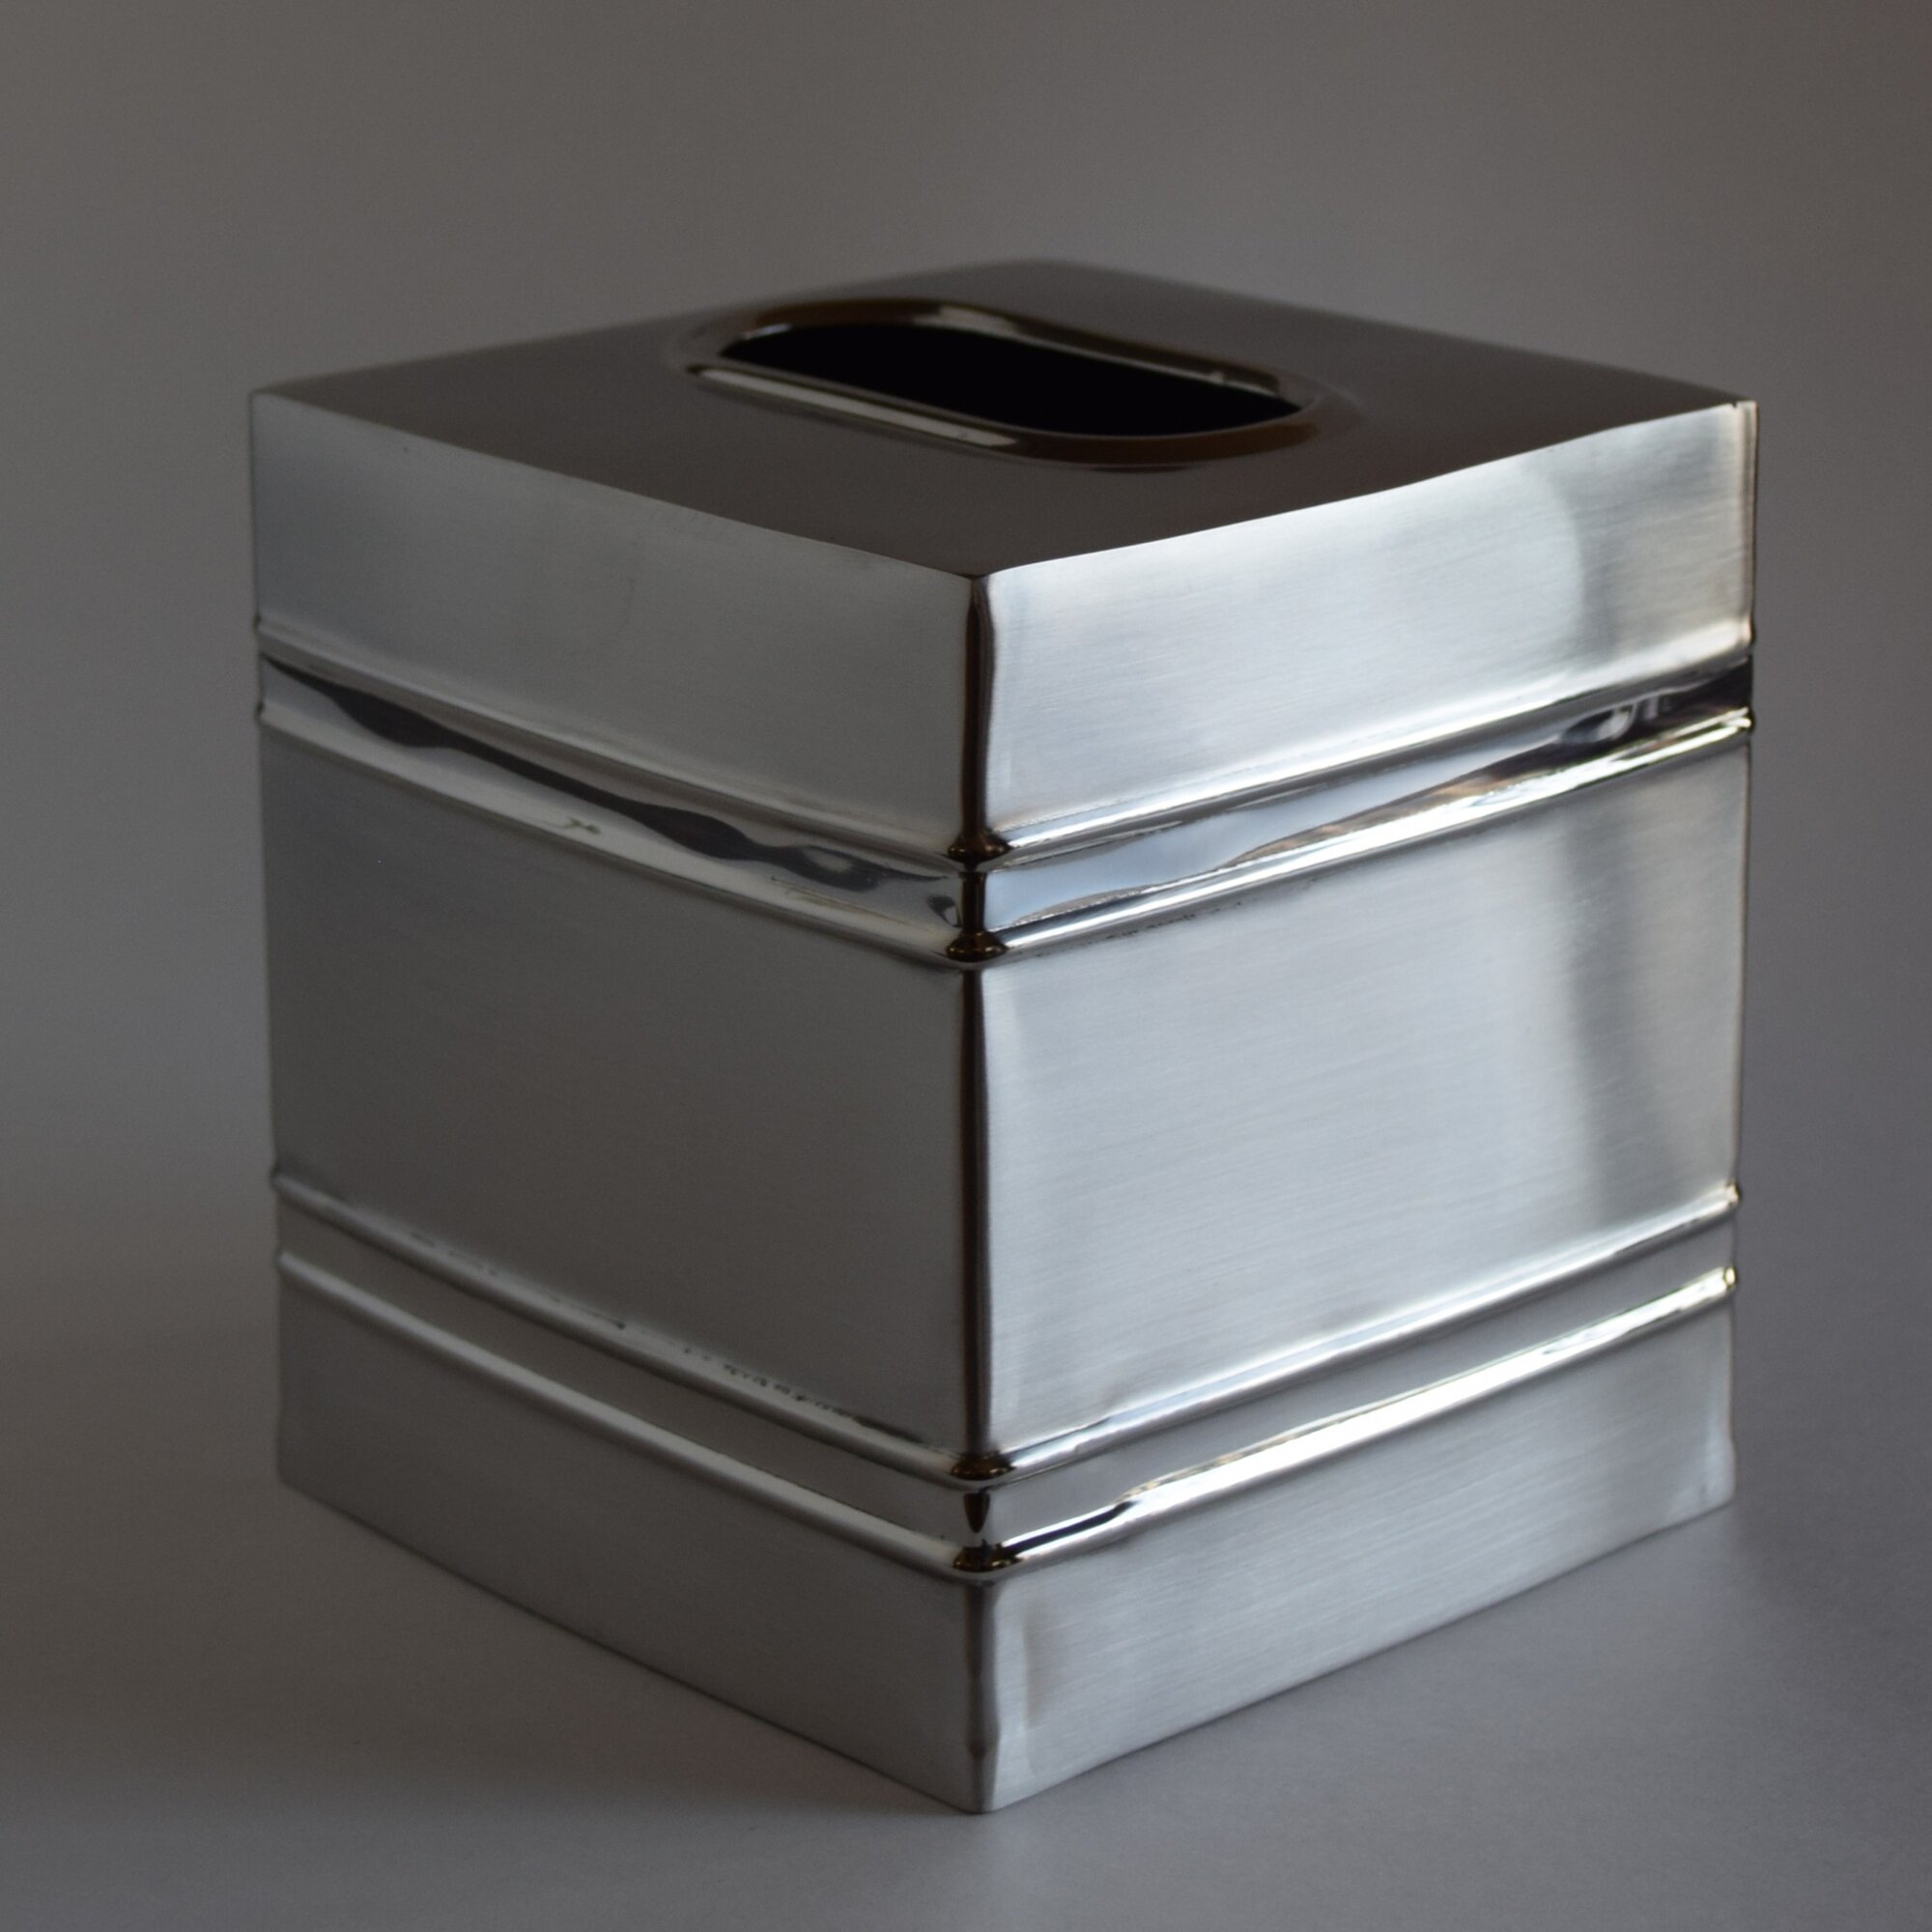 Red Barrel Studio Orchid Stainless Steel Square Tissue Box Cover Stainless Steel Tissue Box Cover